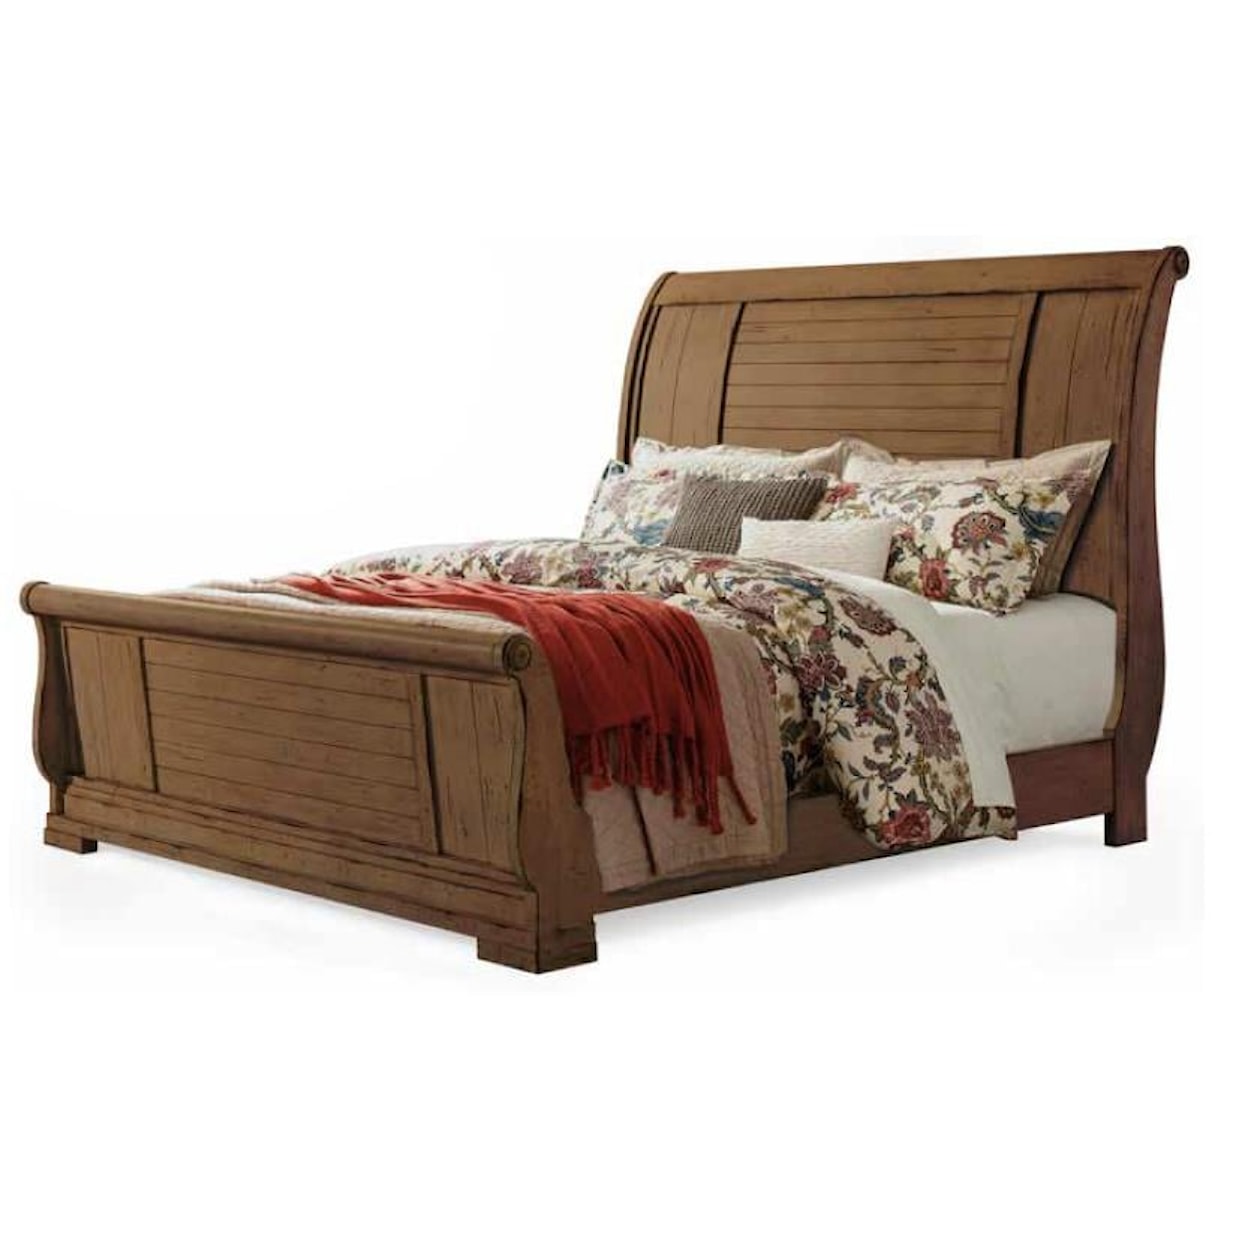 Trisha Yearwood Home Collection by Legacy Classic Coming Home King Sleigh Bed